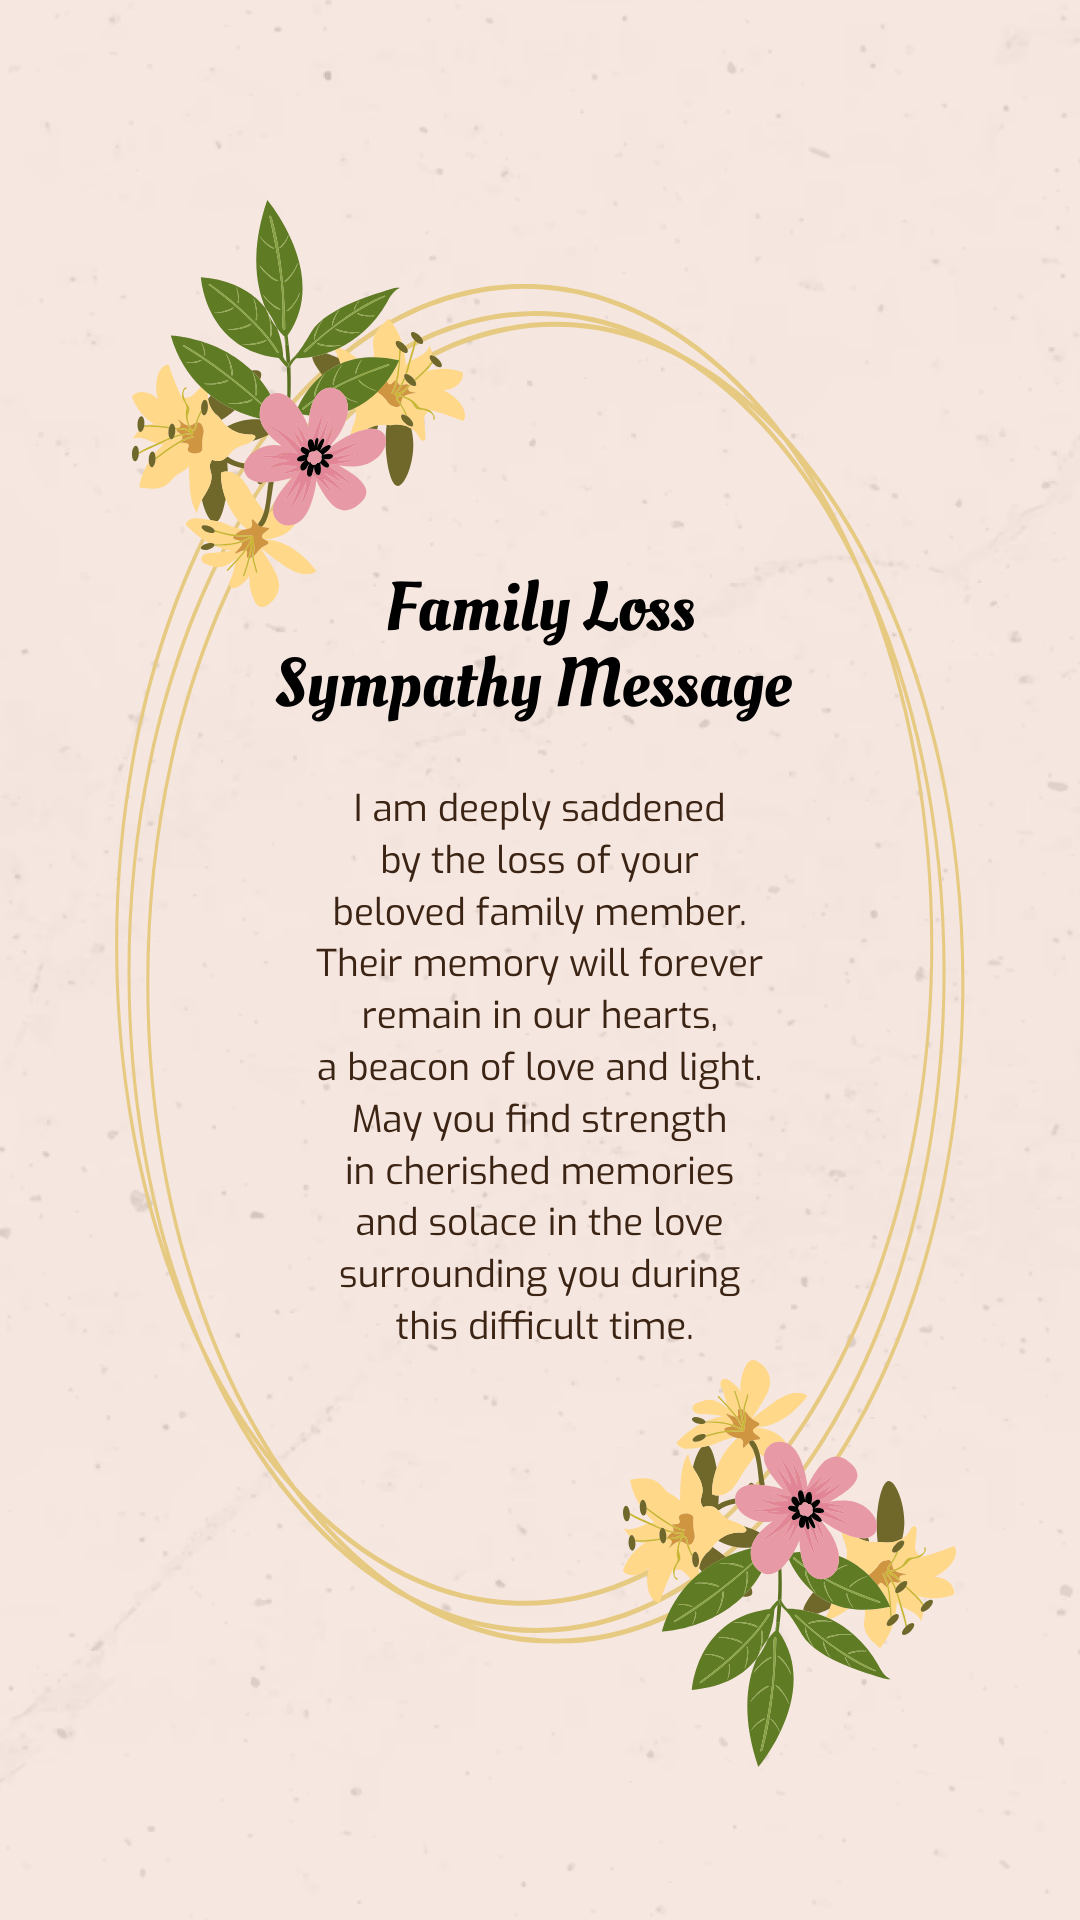 Family Loss Sympathy Message